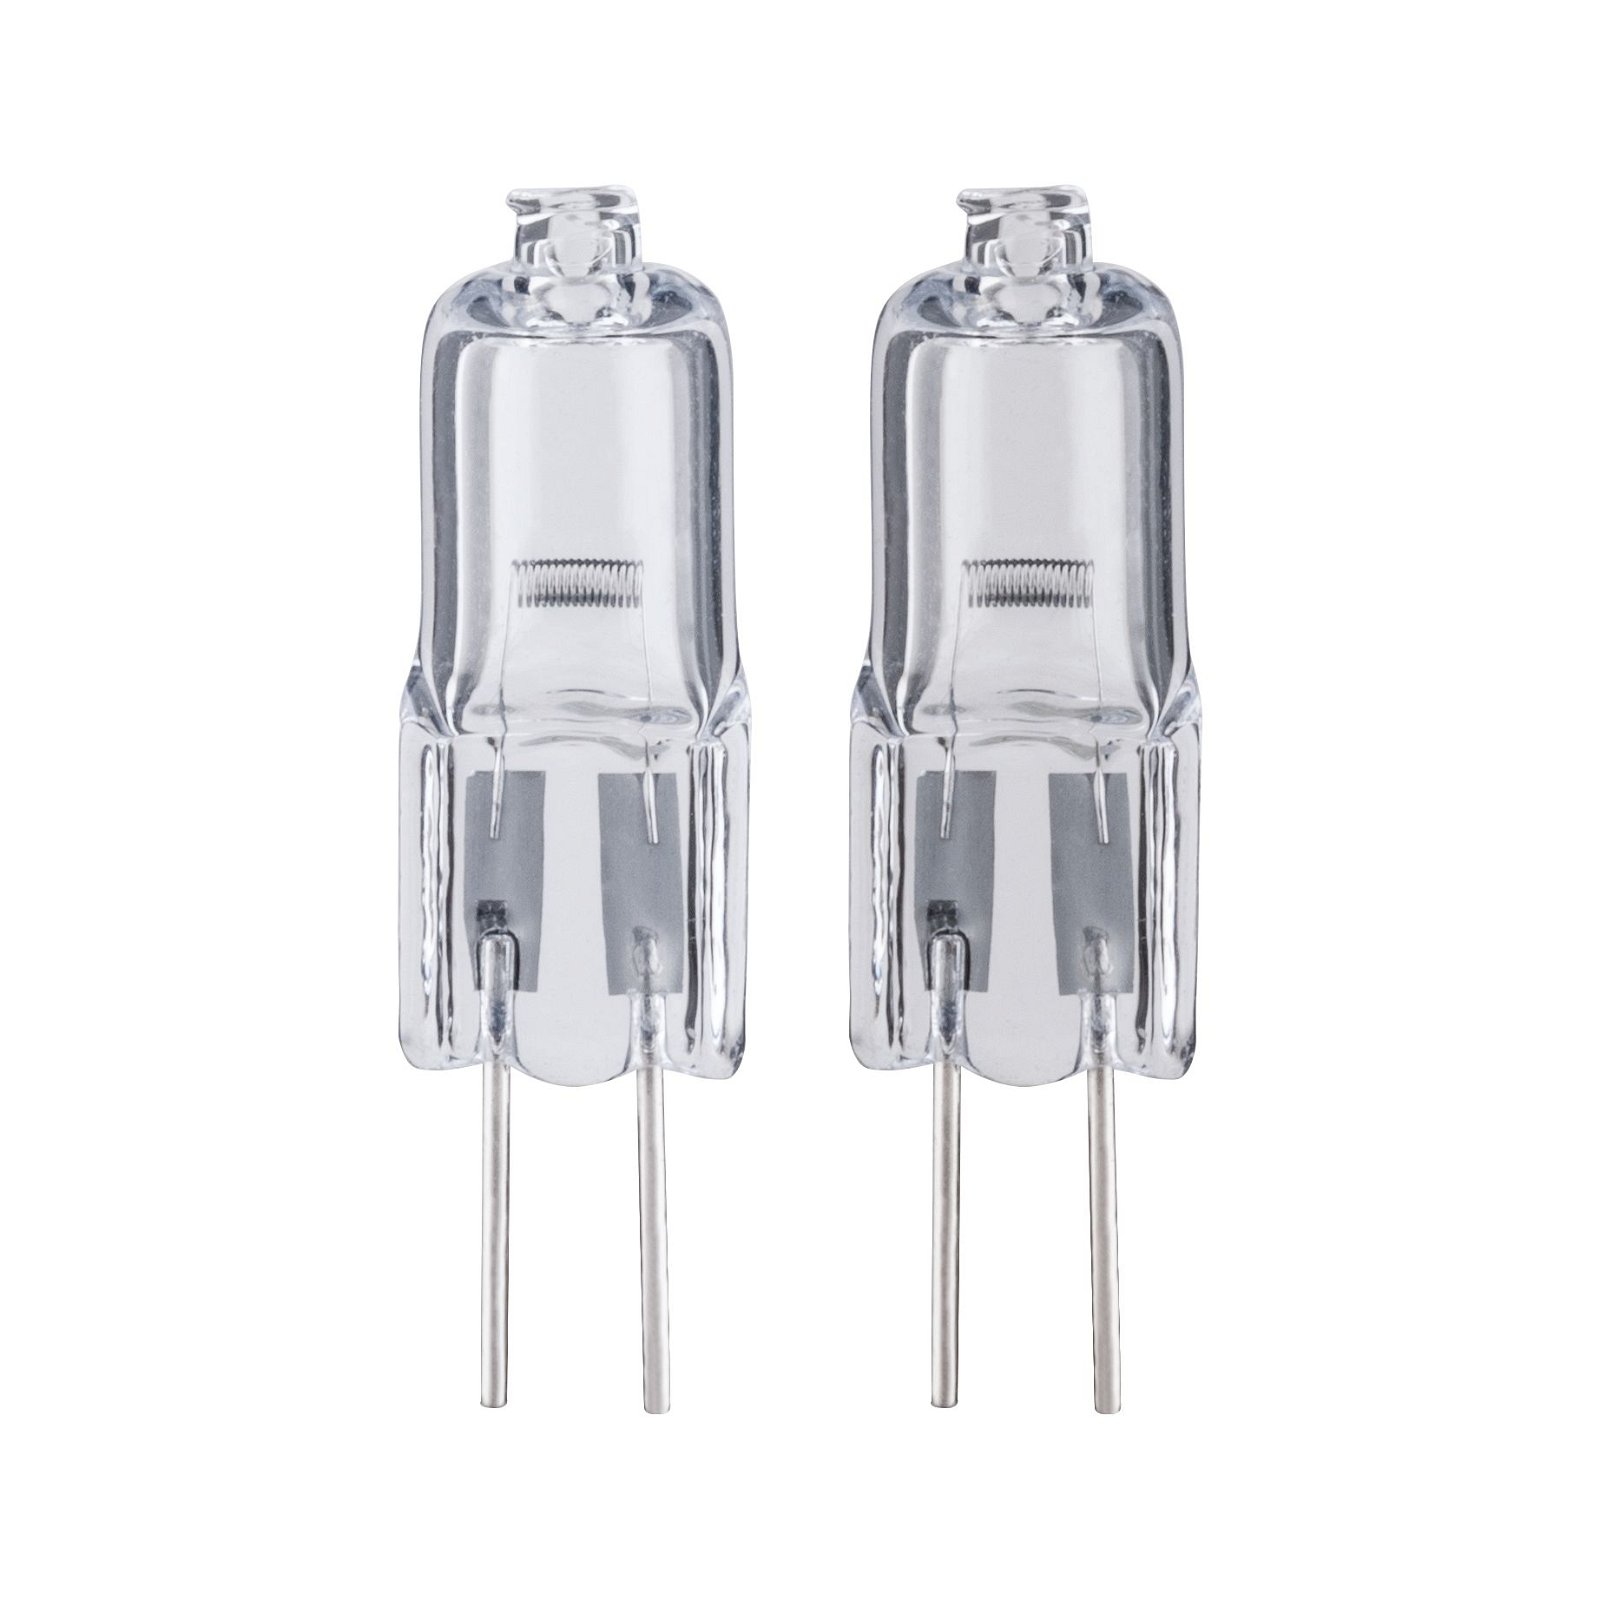 Low-voltage halogen G4 12V 2x766lm 2x35W 2900K dimmable Clear